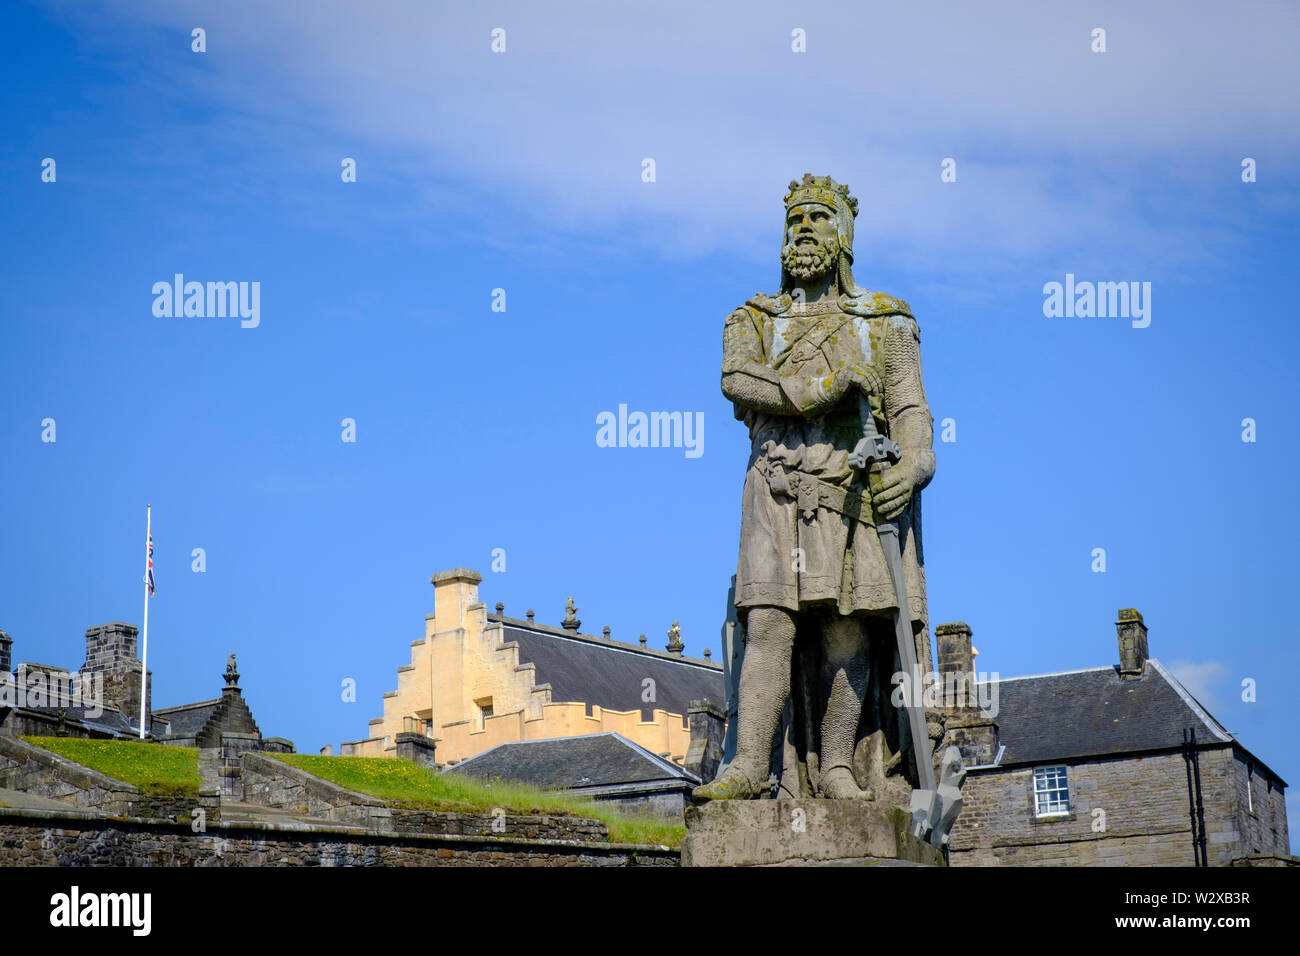 Statue of King Robert the Bruce at Stirling Castle Stirling Stirlingshire Scotland Stock Photo